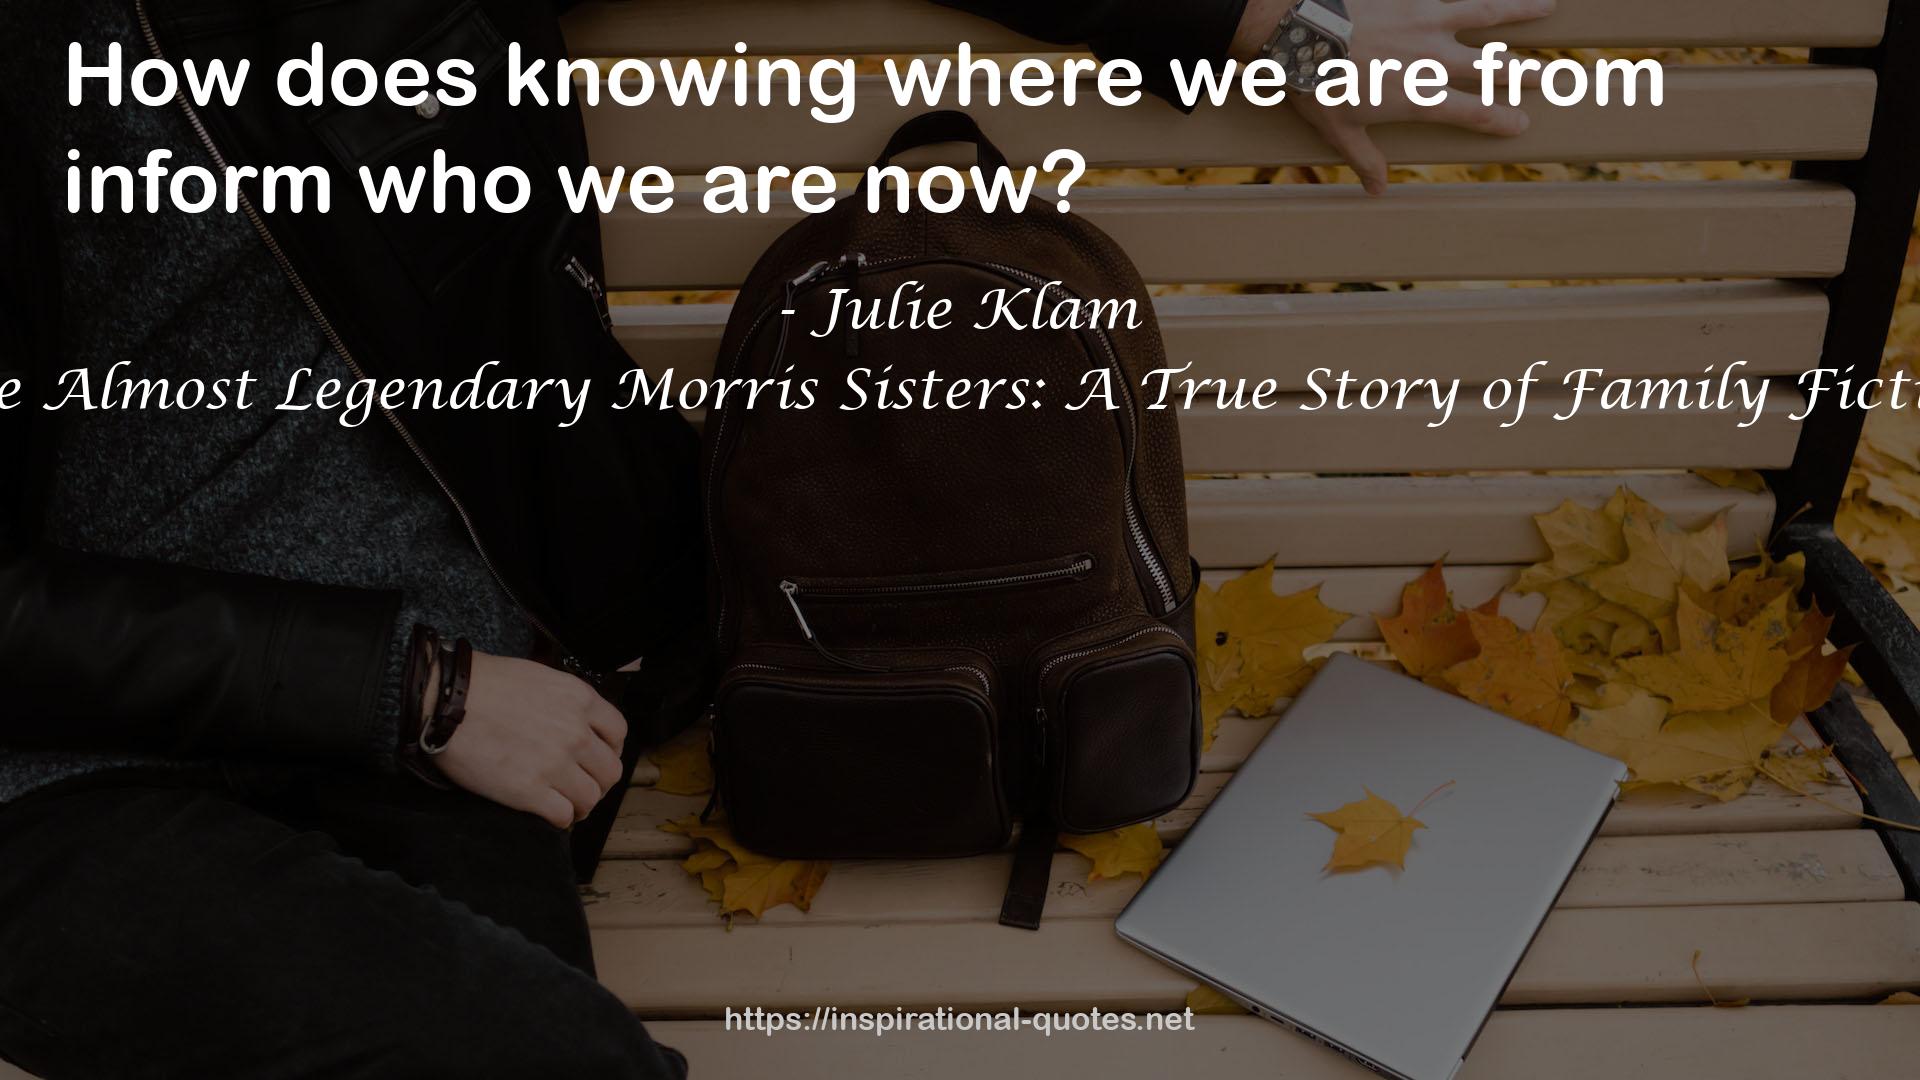 The Almost Legendary Morris Sisters: A True Story of Family Fiction QUOTES